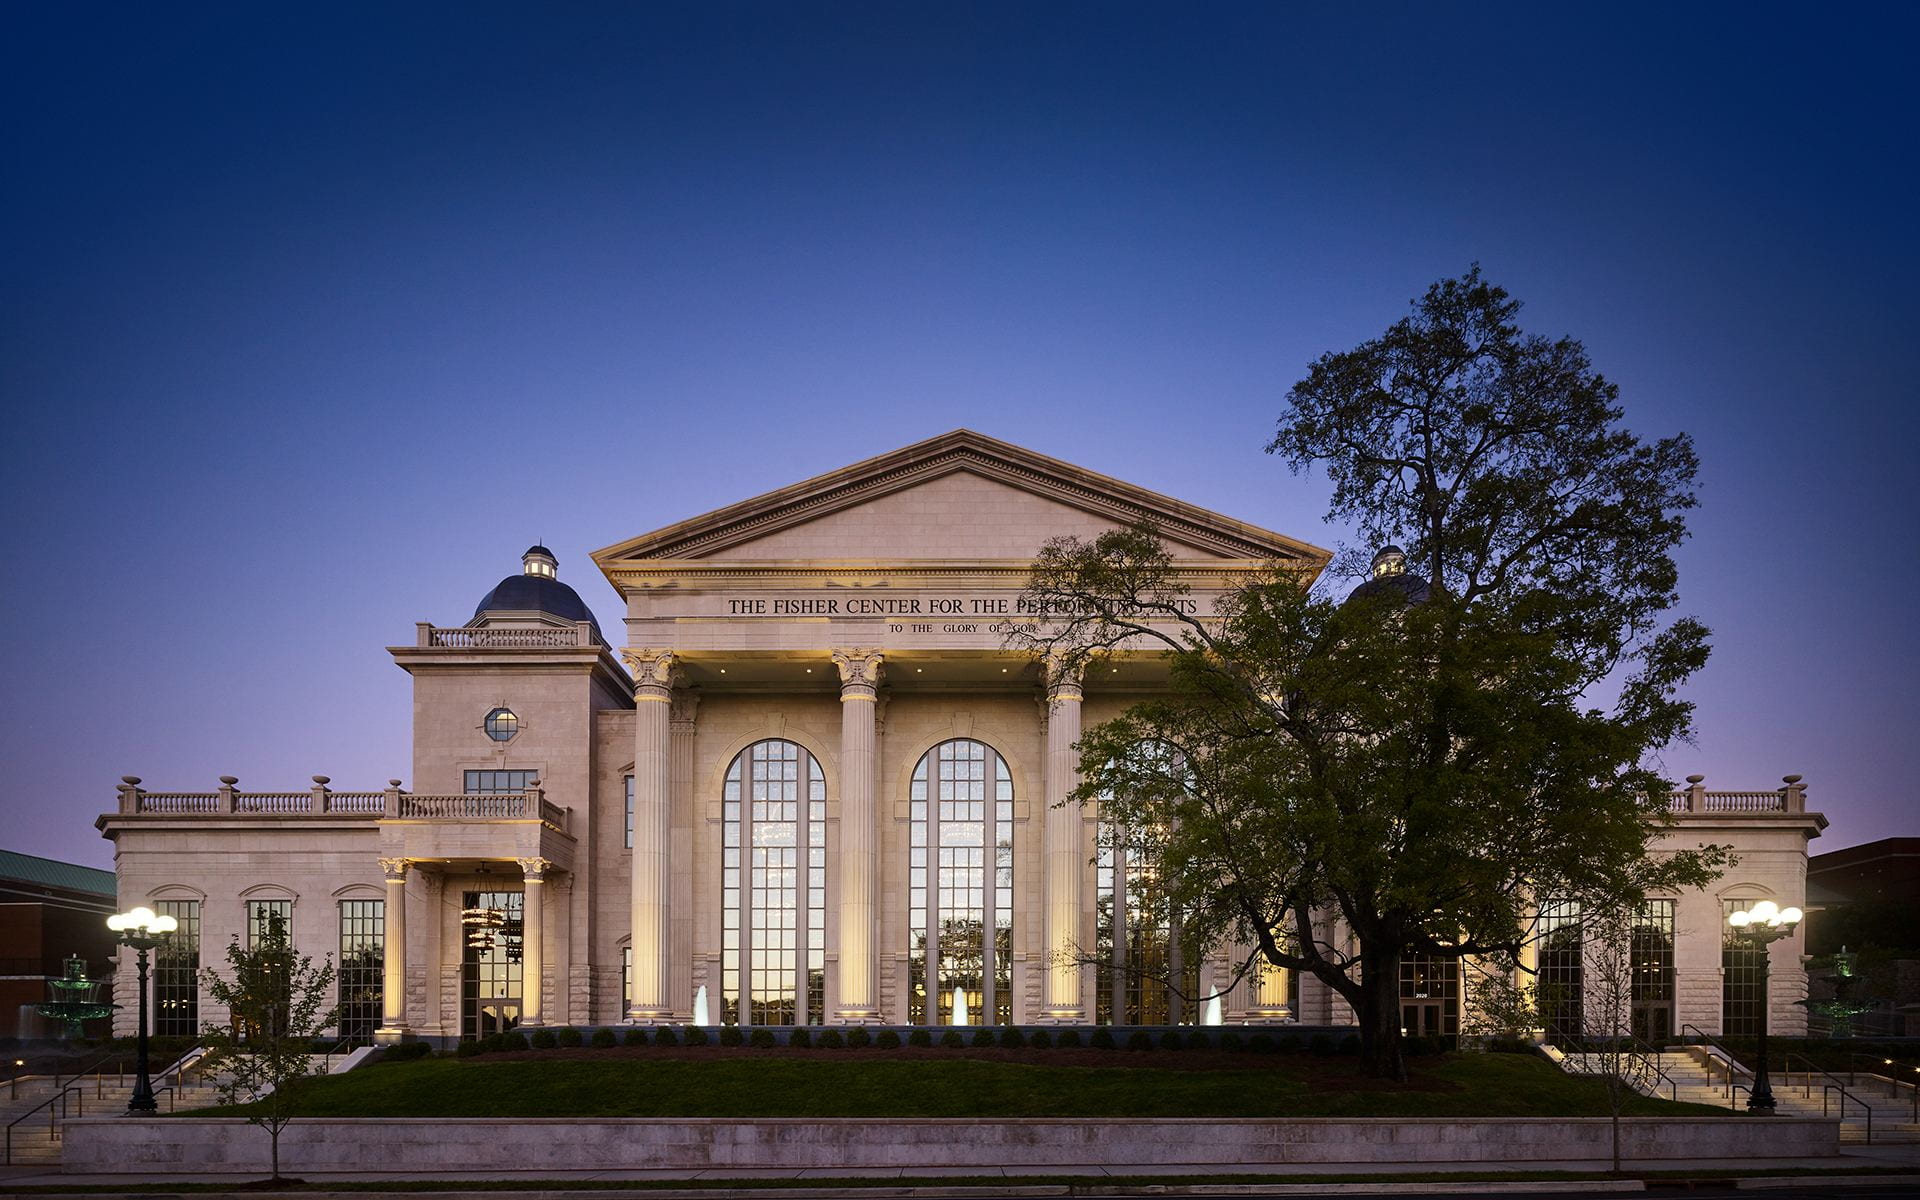 The fisher center exterior at dusk